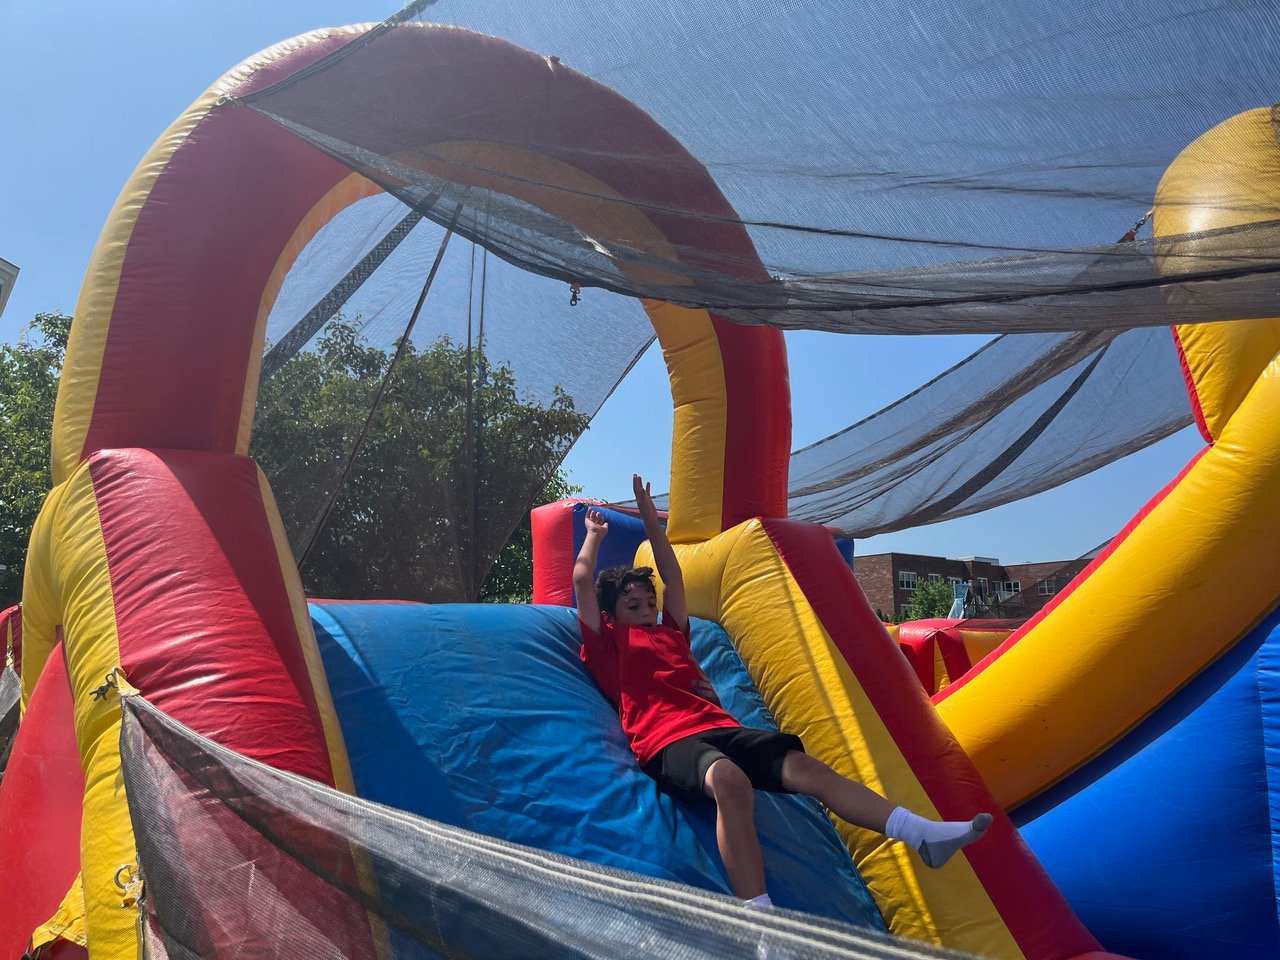 Second grade student Matthew Sasso sliding down the bouncy obstacle course.